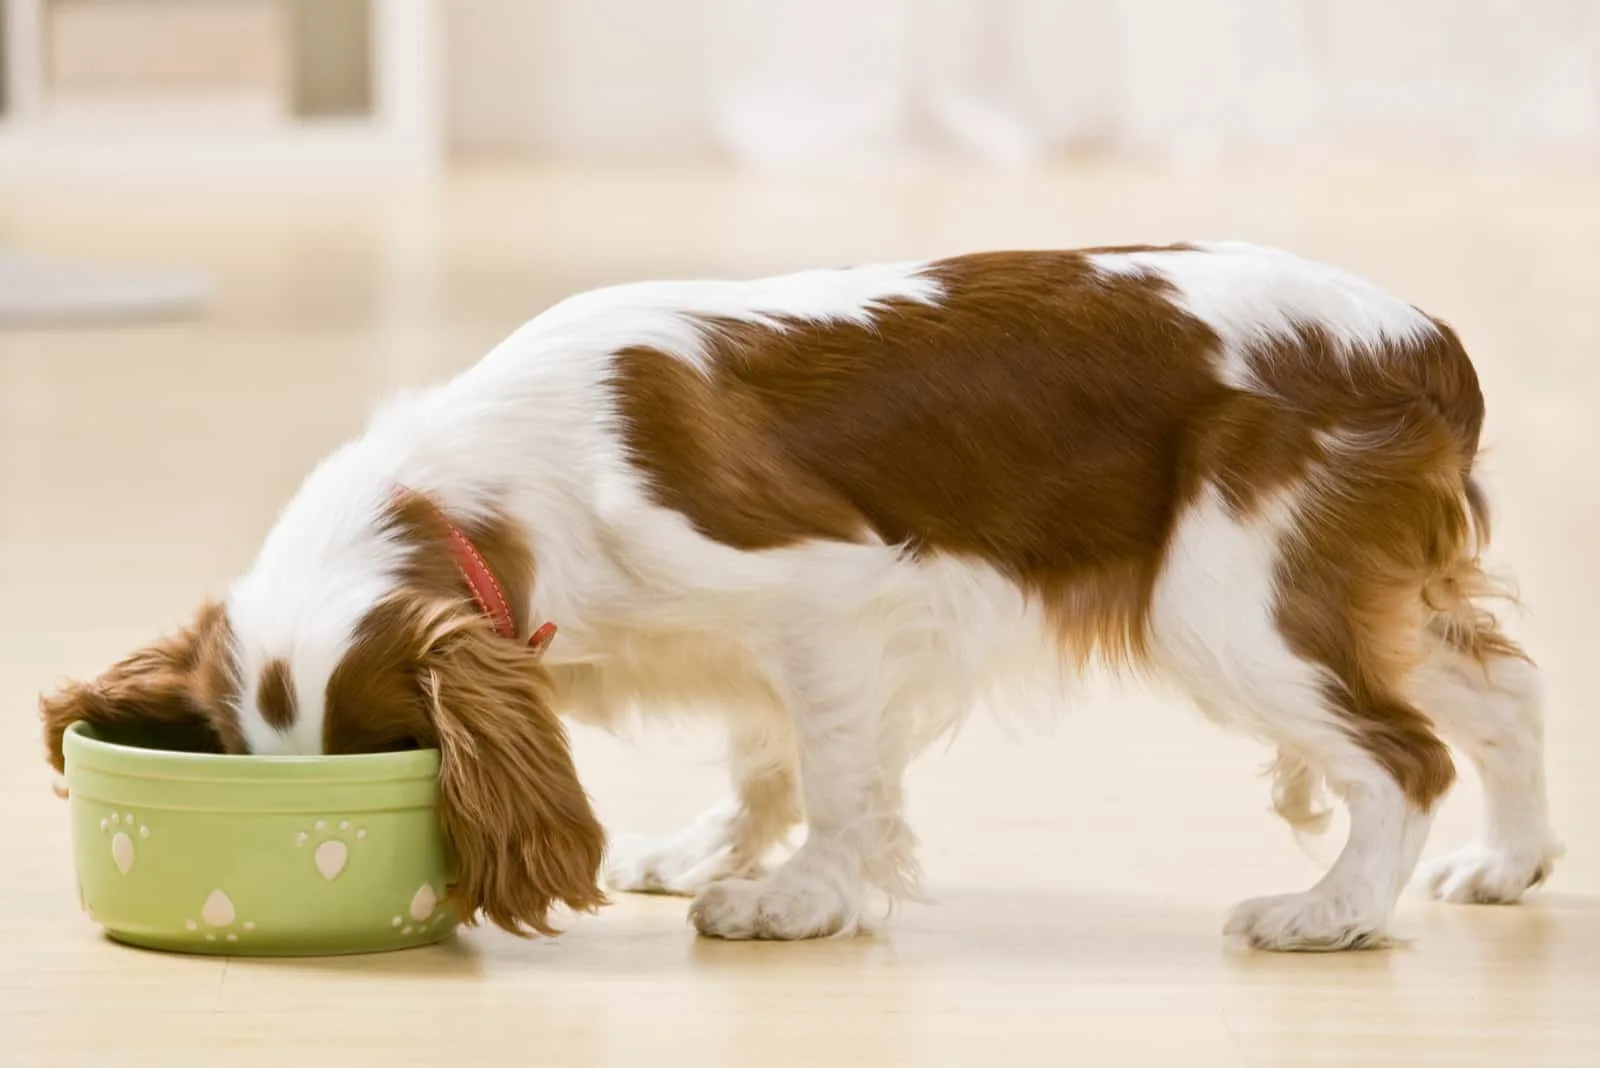 the dog eats food from a bowl